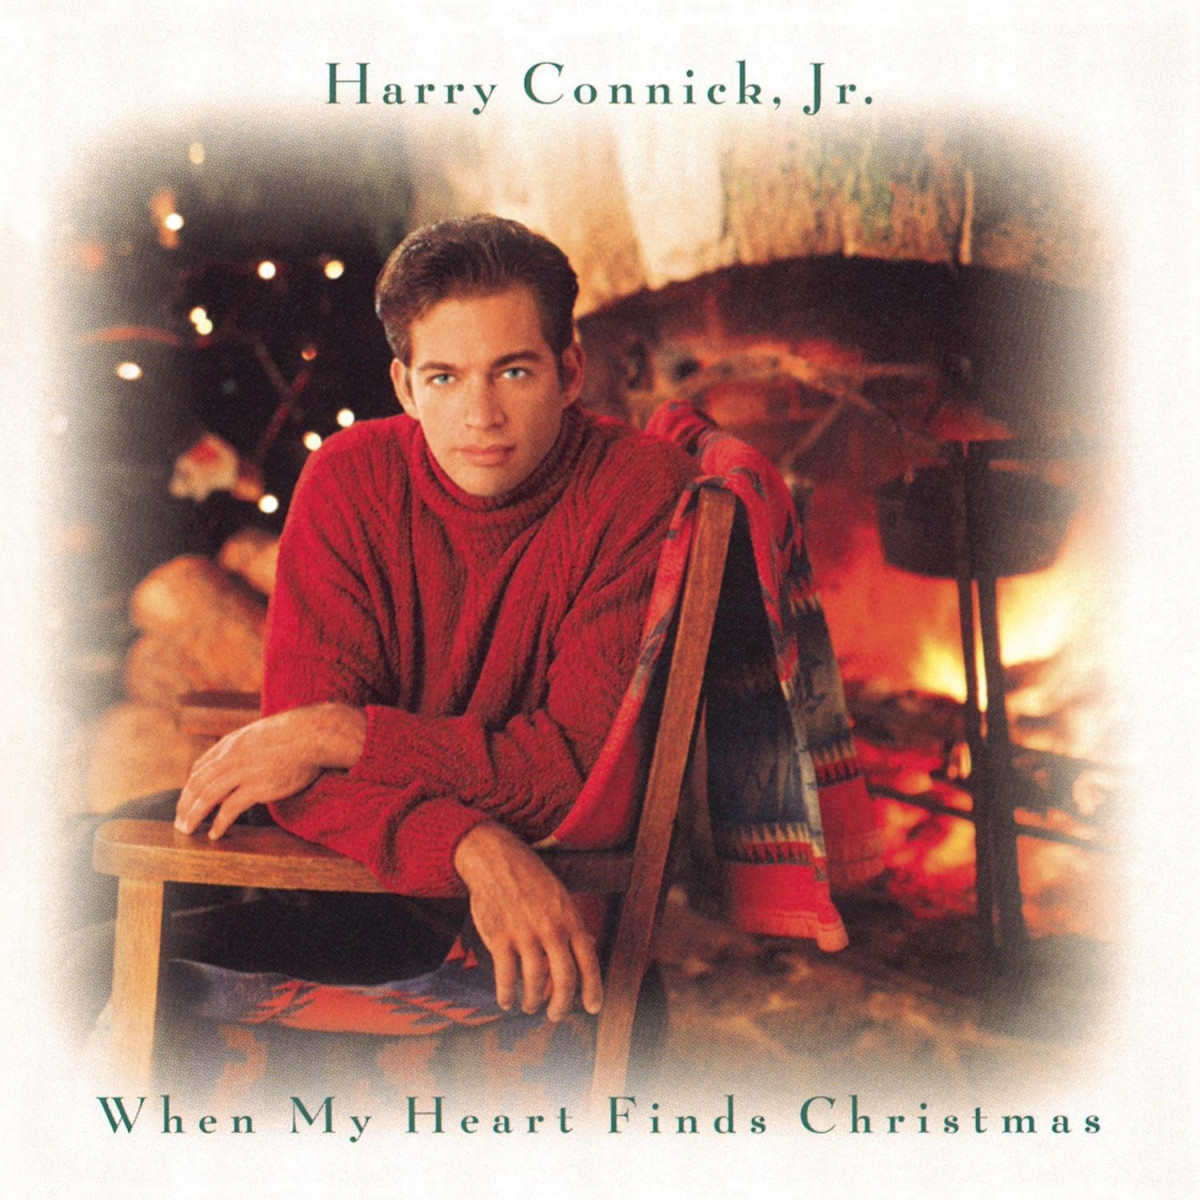 Harry Connick Jr. - When my heart finds Christmas